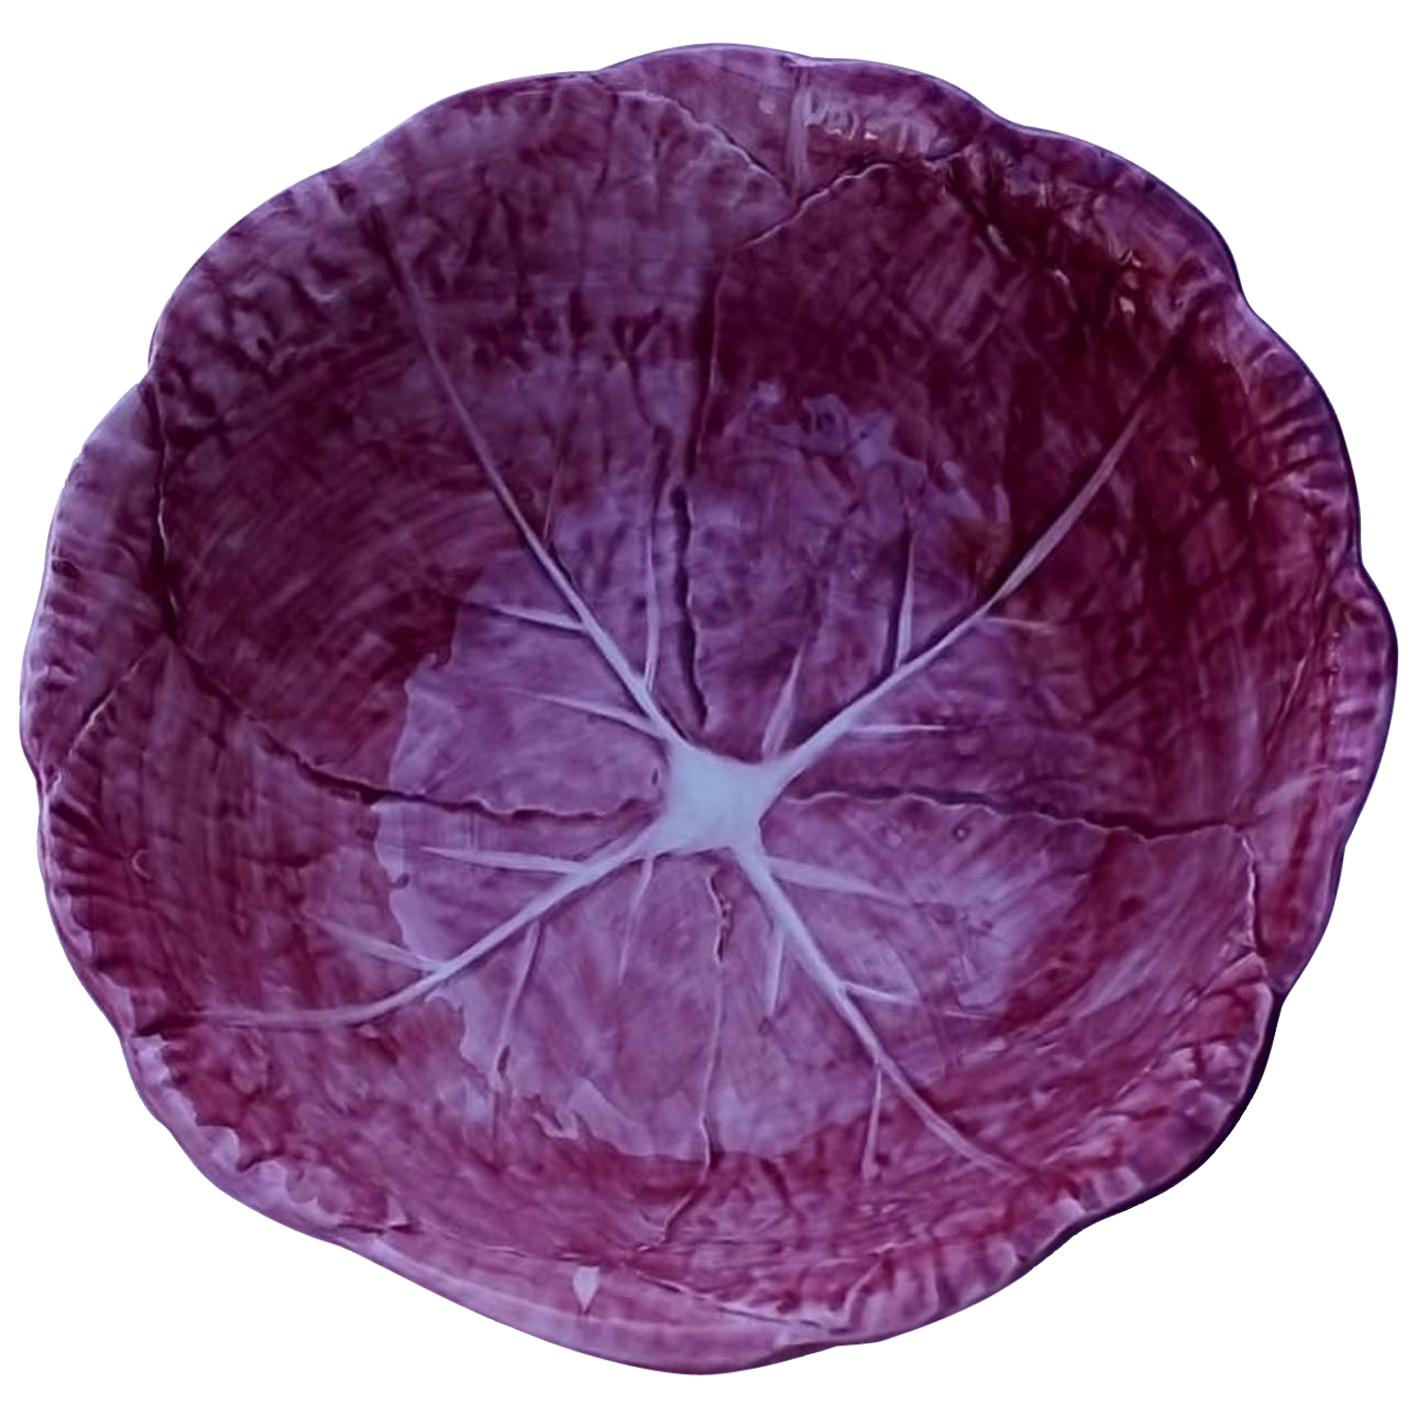 Radicchio Hand Painted Ceramic Salad Bowl Made in Italy For Sale